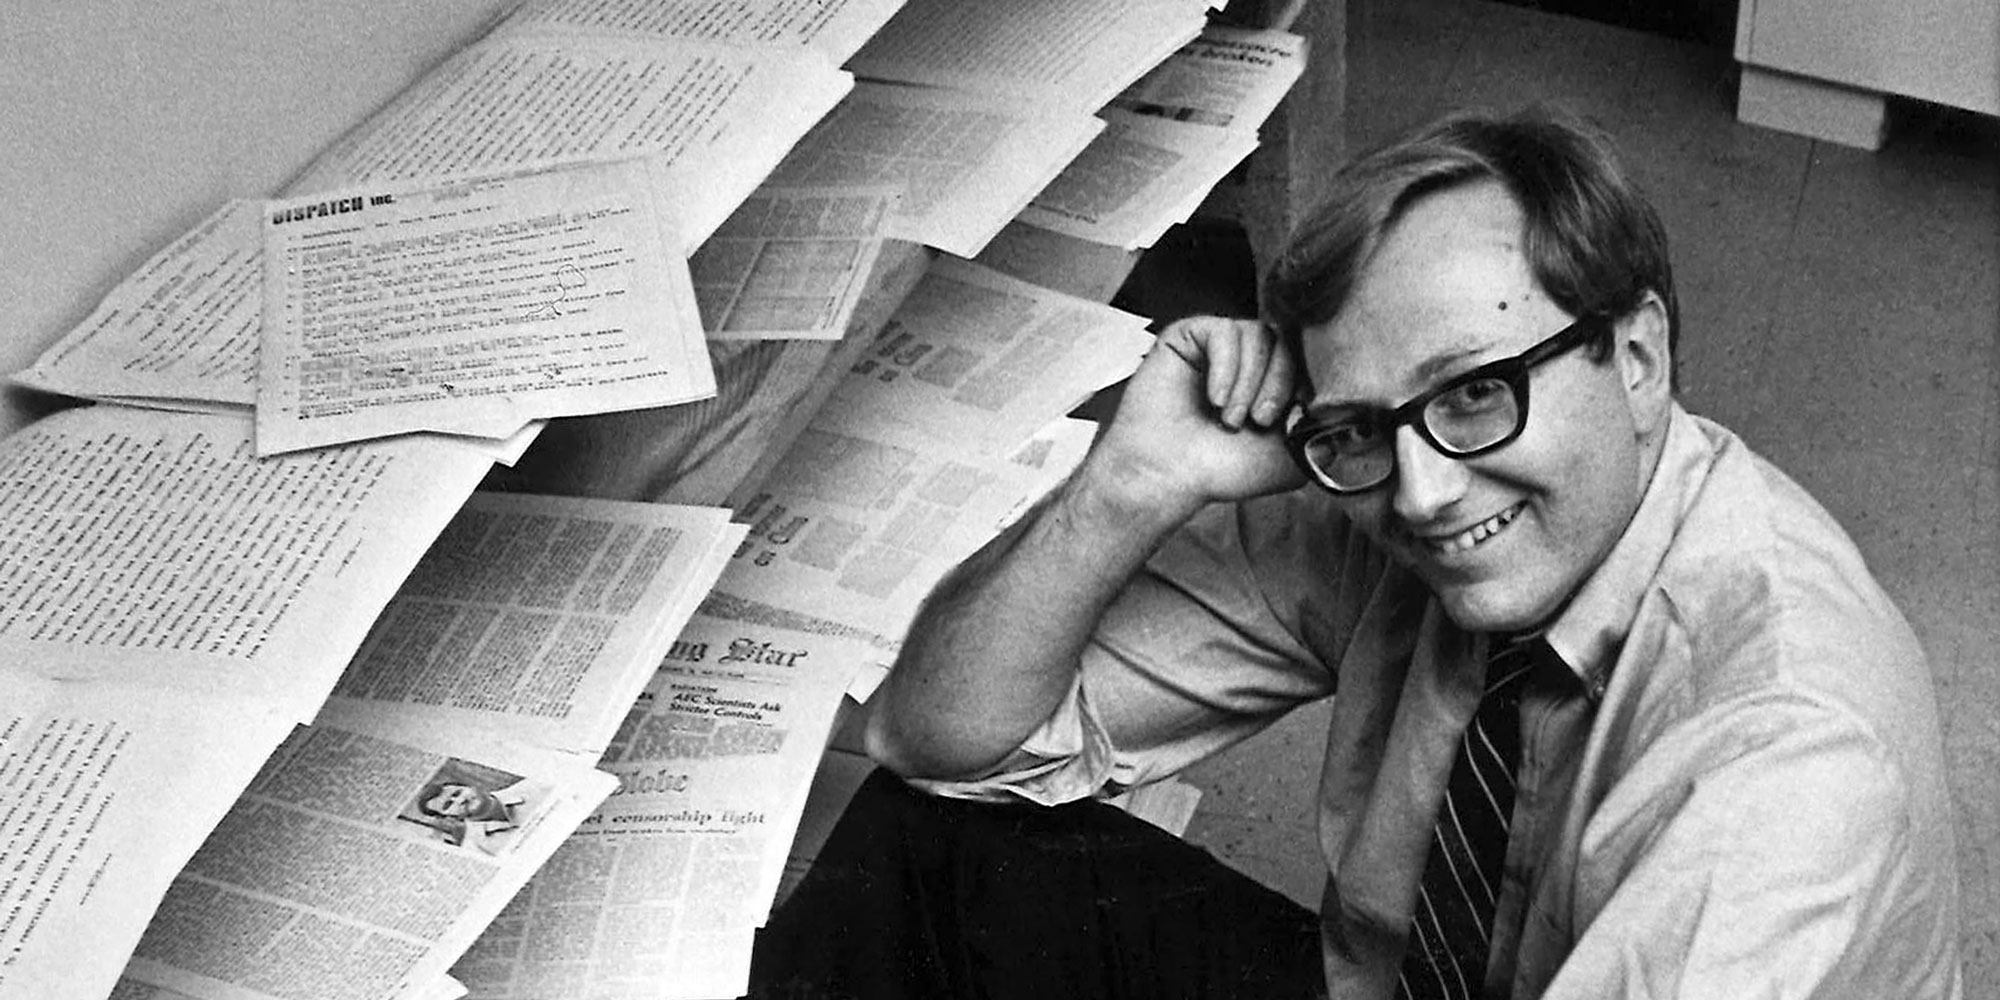 Seymour M. Hersh sits in the furnitureless office of Dispatch News Service in Washington, May 4, 1970, after being awarded the Pulitzer Prize for international reporting. Hersh disclosed the alleged massacre of Vietnamese civilians at My Lai. (AP Photo/Bob Daugherty)